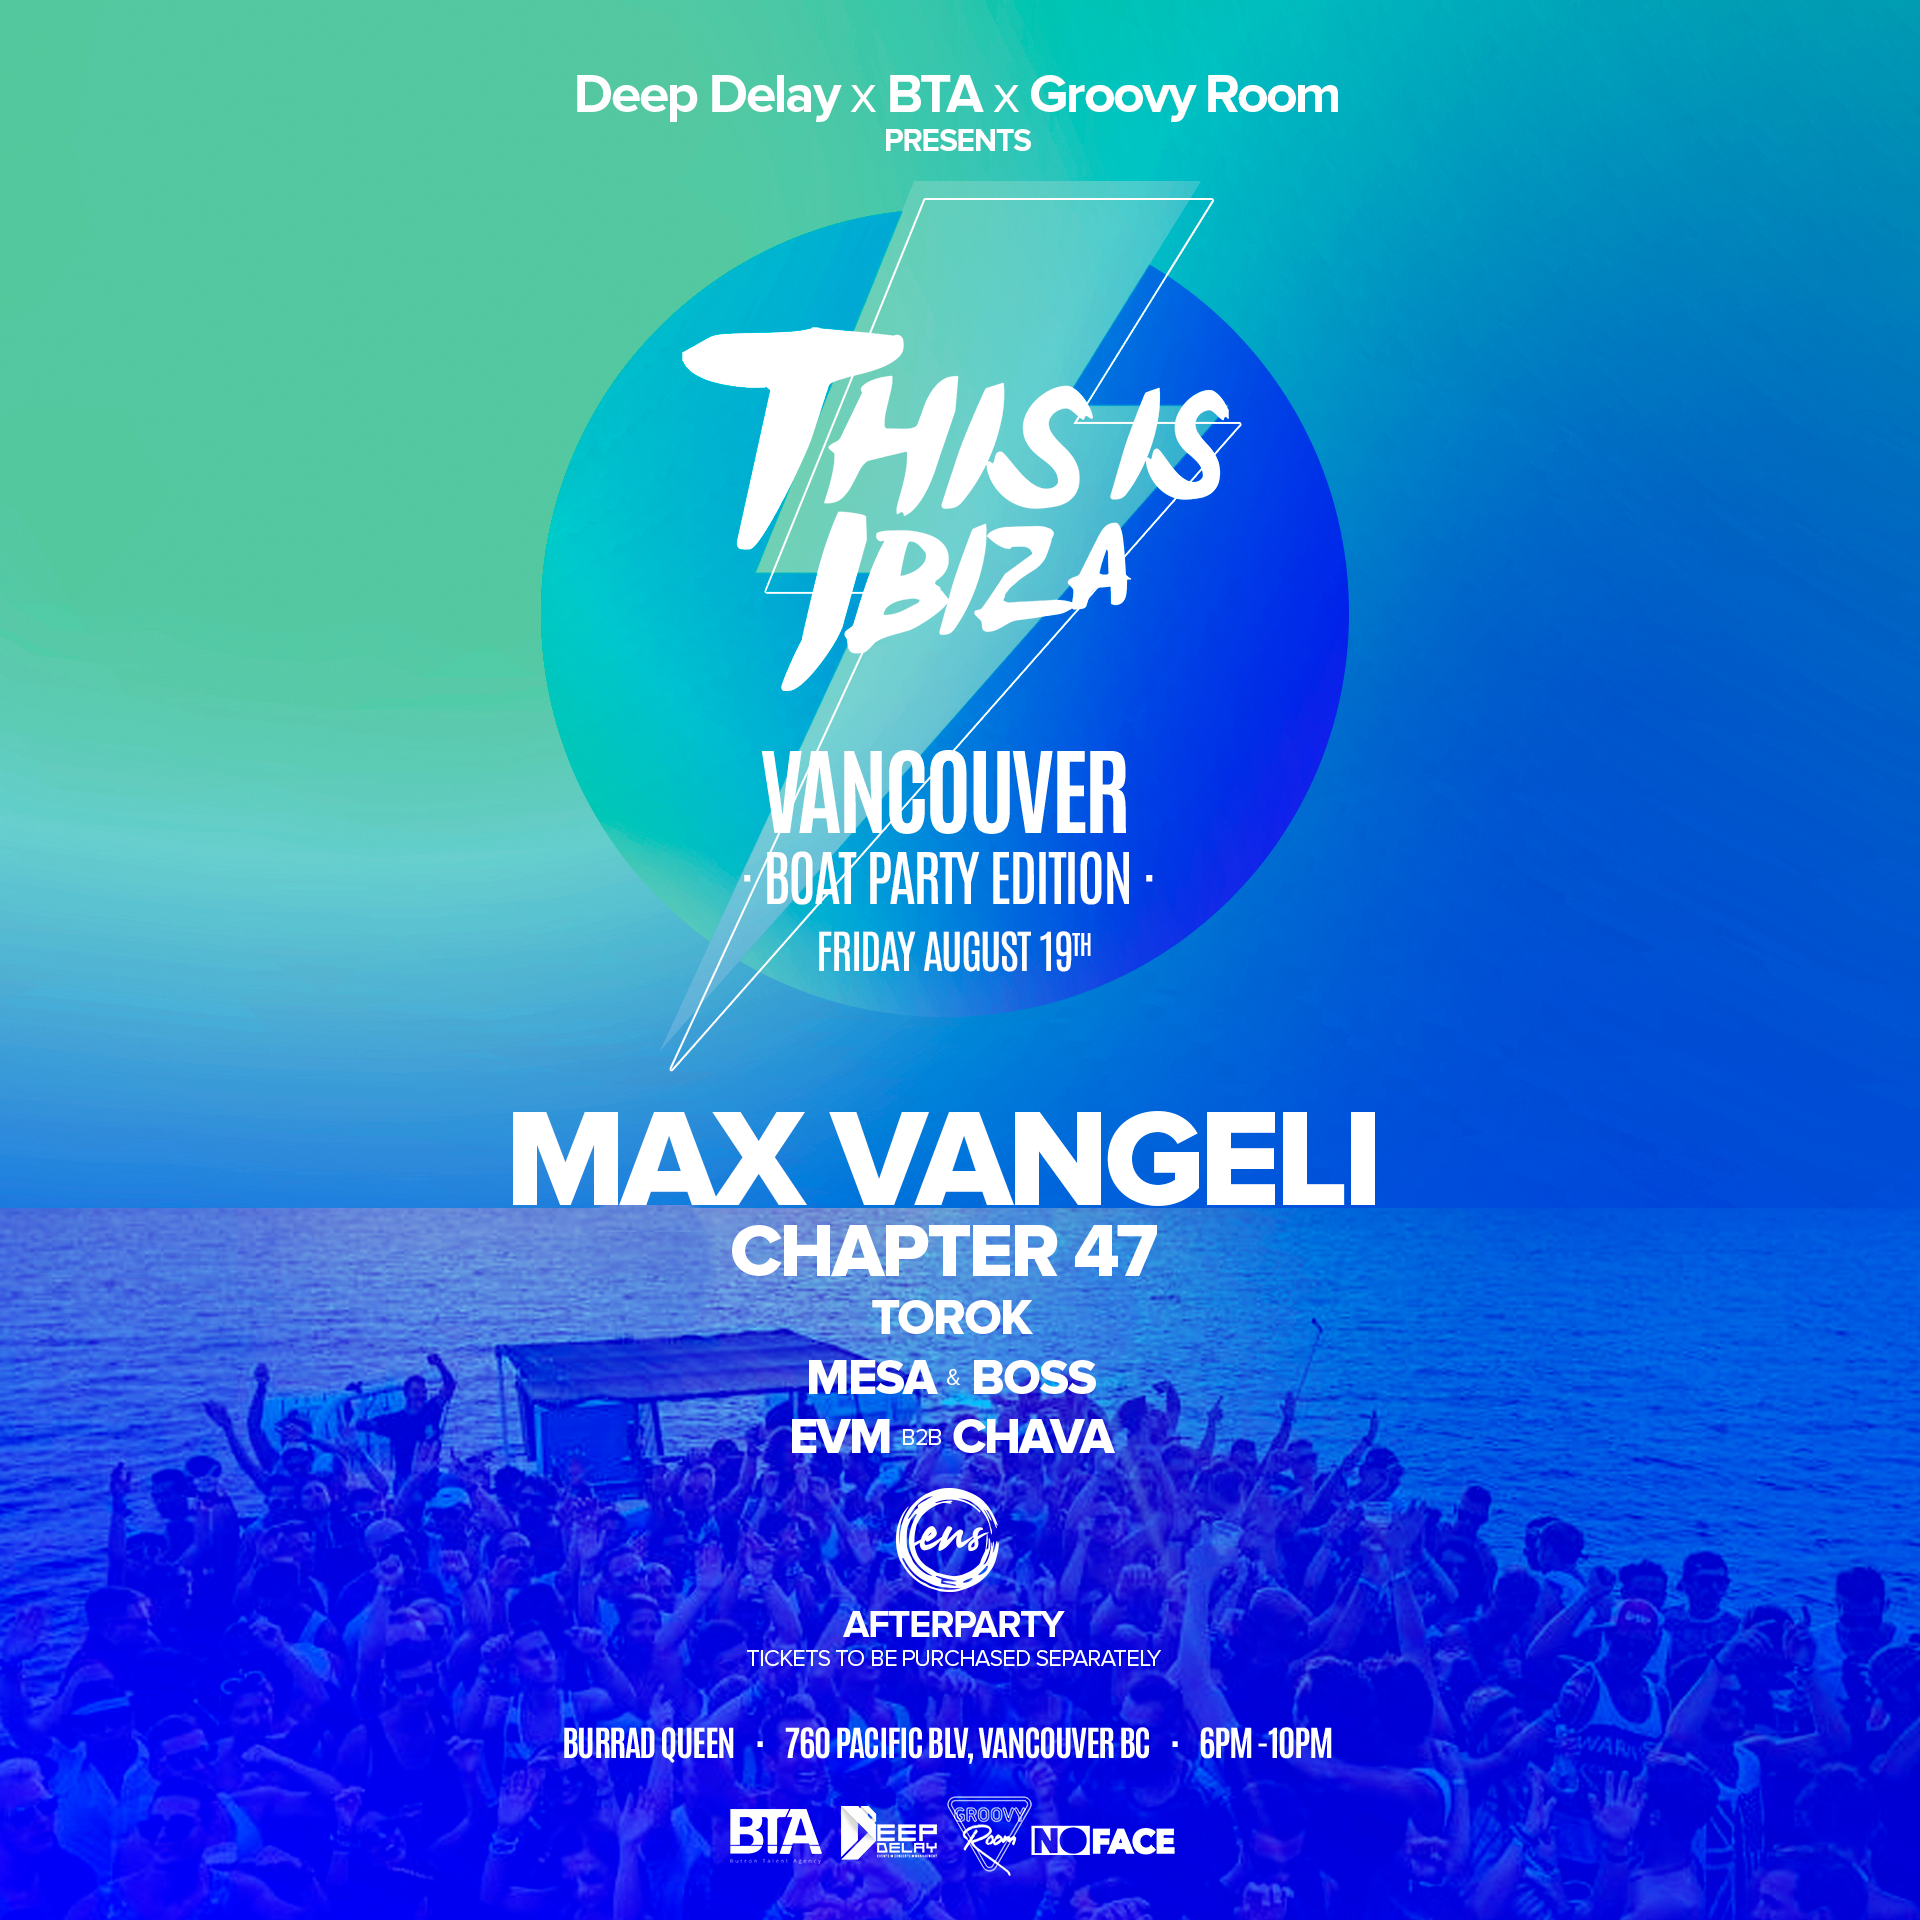 DEEP DELAY TRAVEL TO VANCUVER WITH THE BRAND : ¡THIS IS IBIZA! IN A BOAT PARTY EDITION